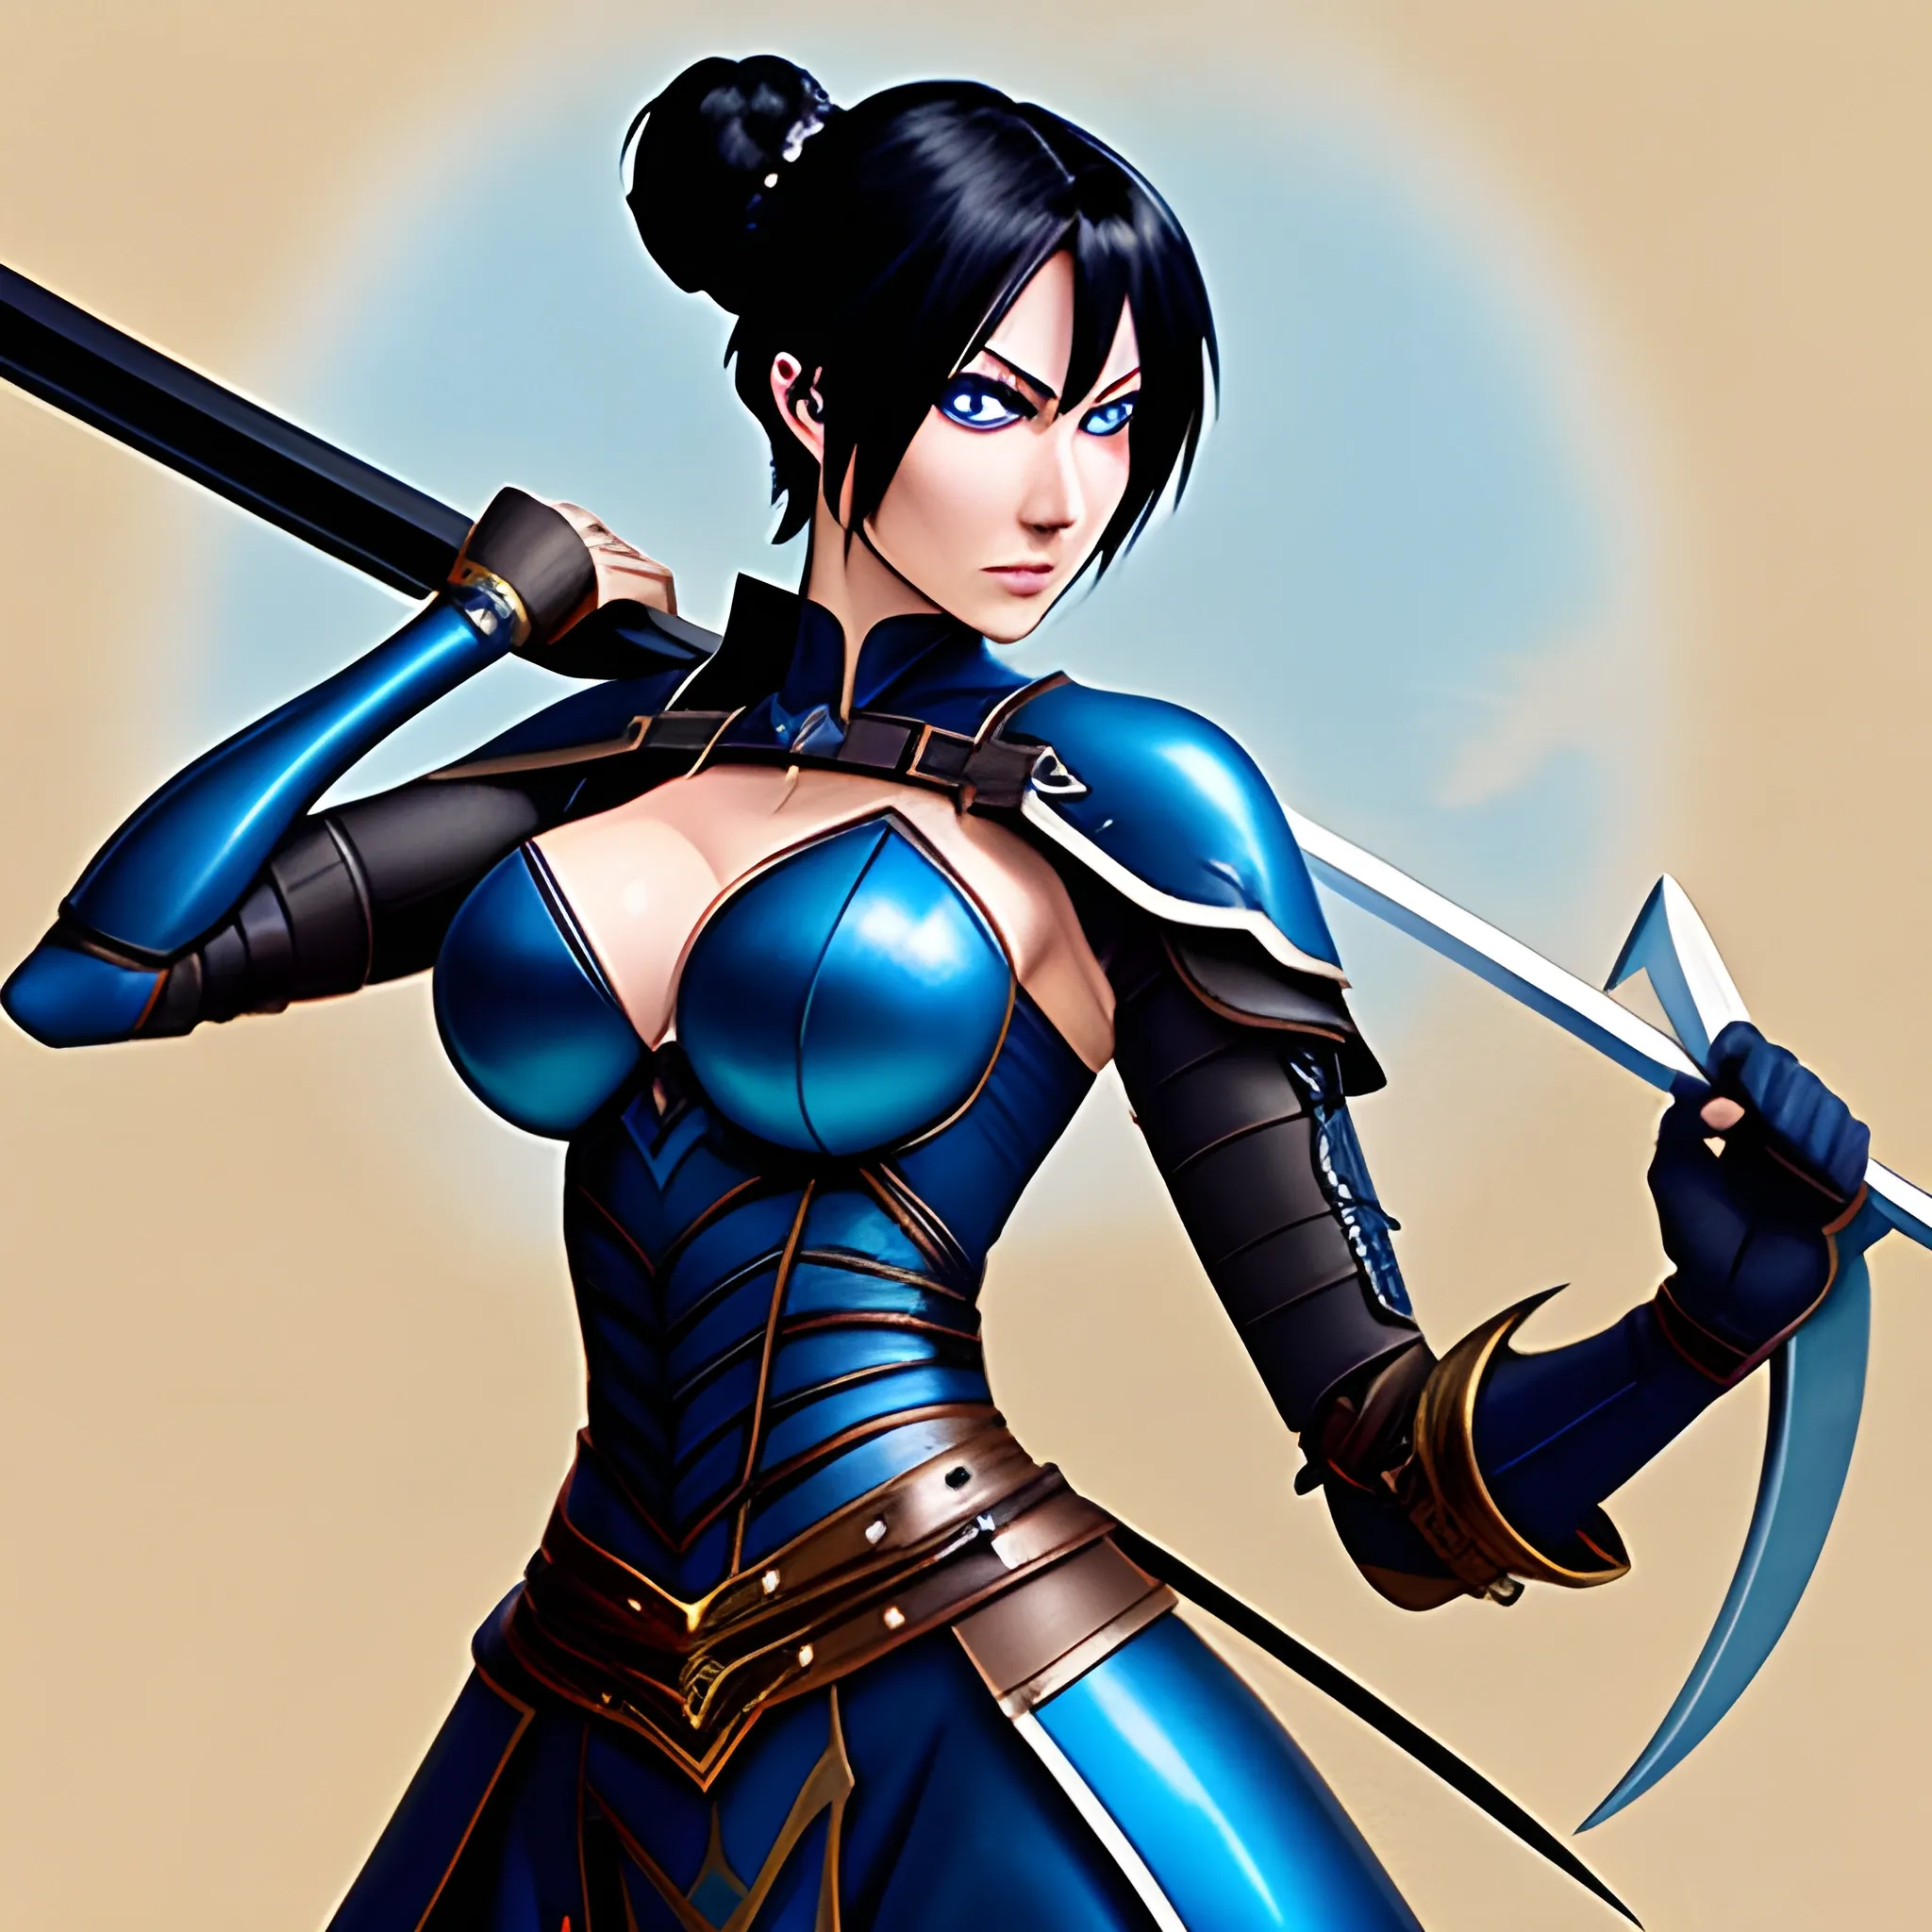 a medieval warrior anime girl with short black hair in a bun, blue eyes and pale skin, wielding a two-handed claymore